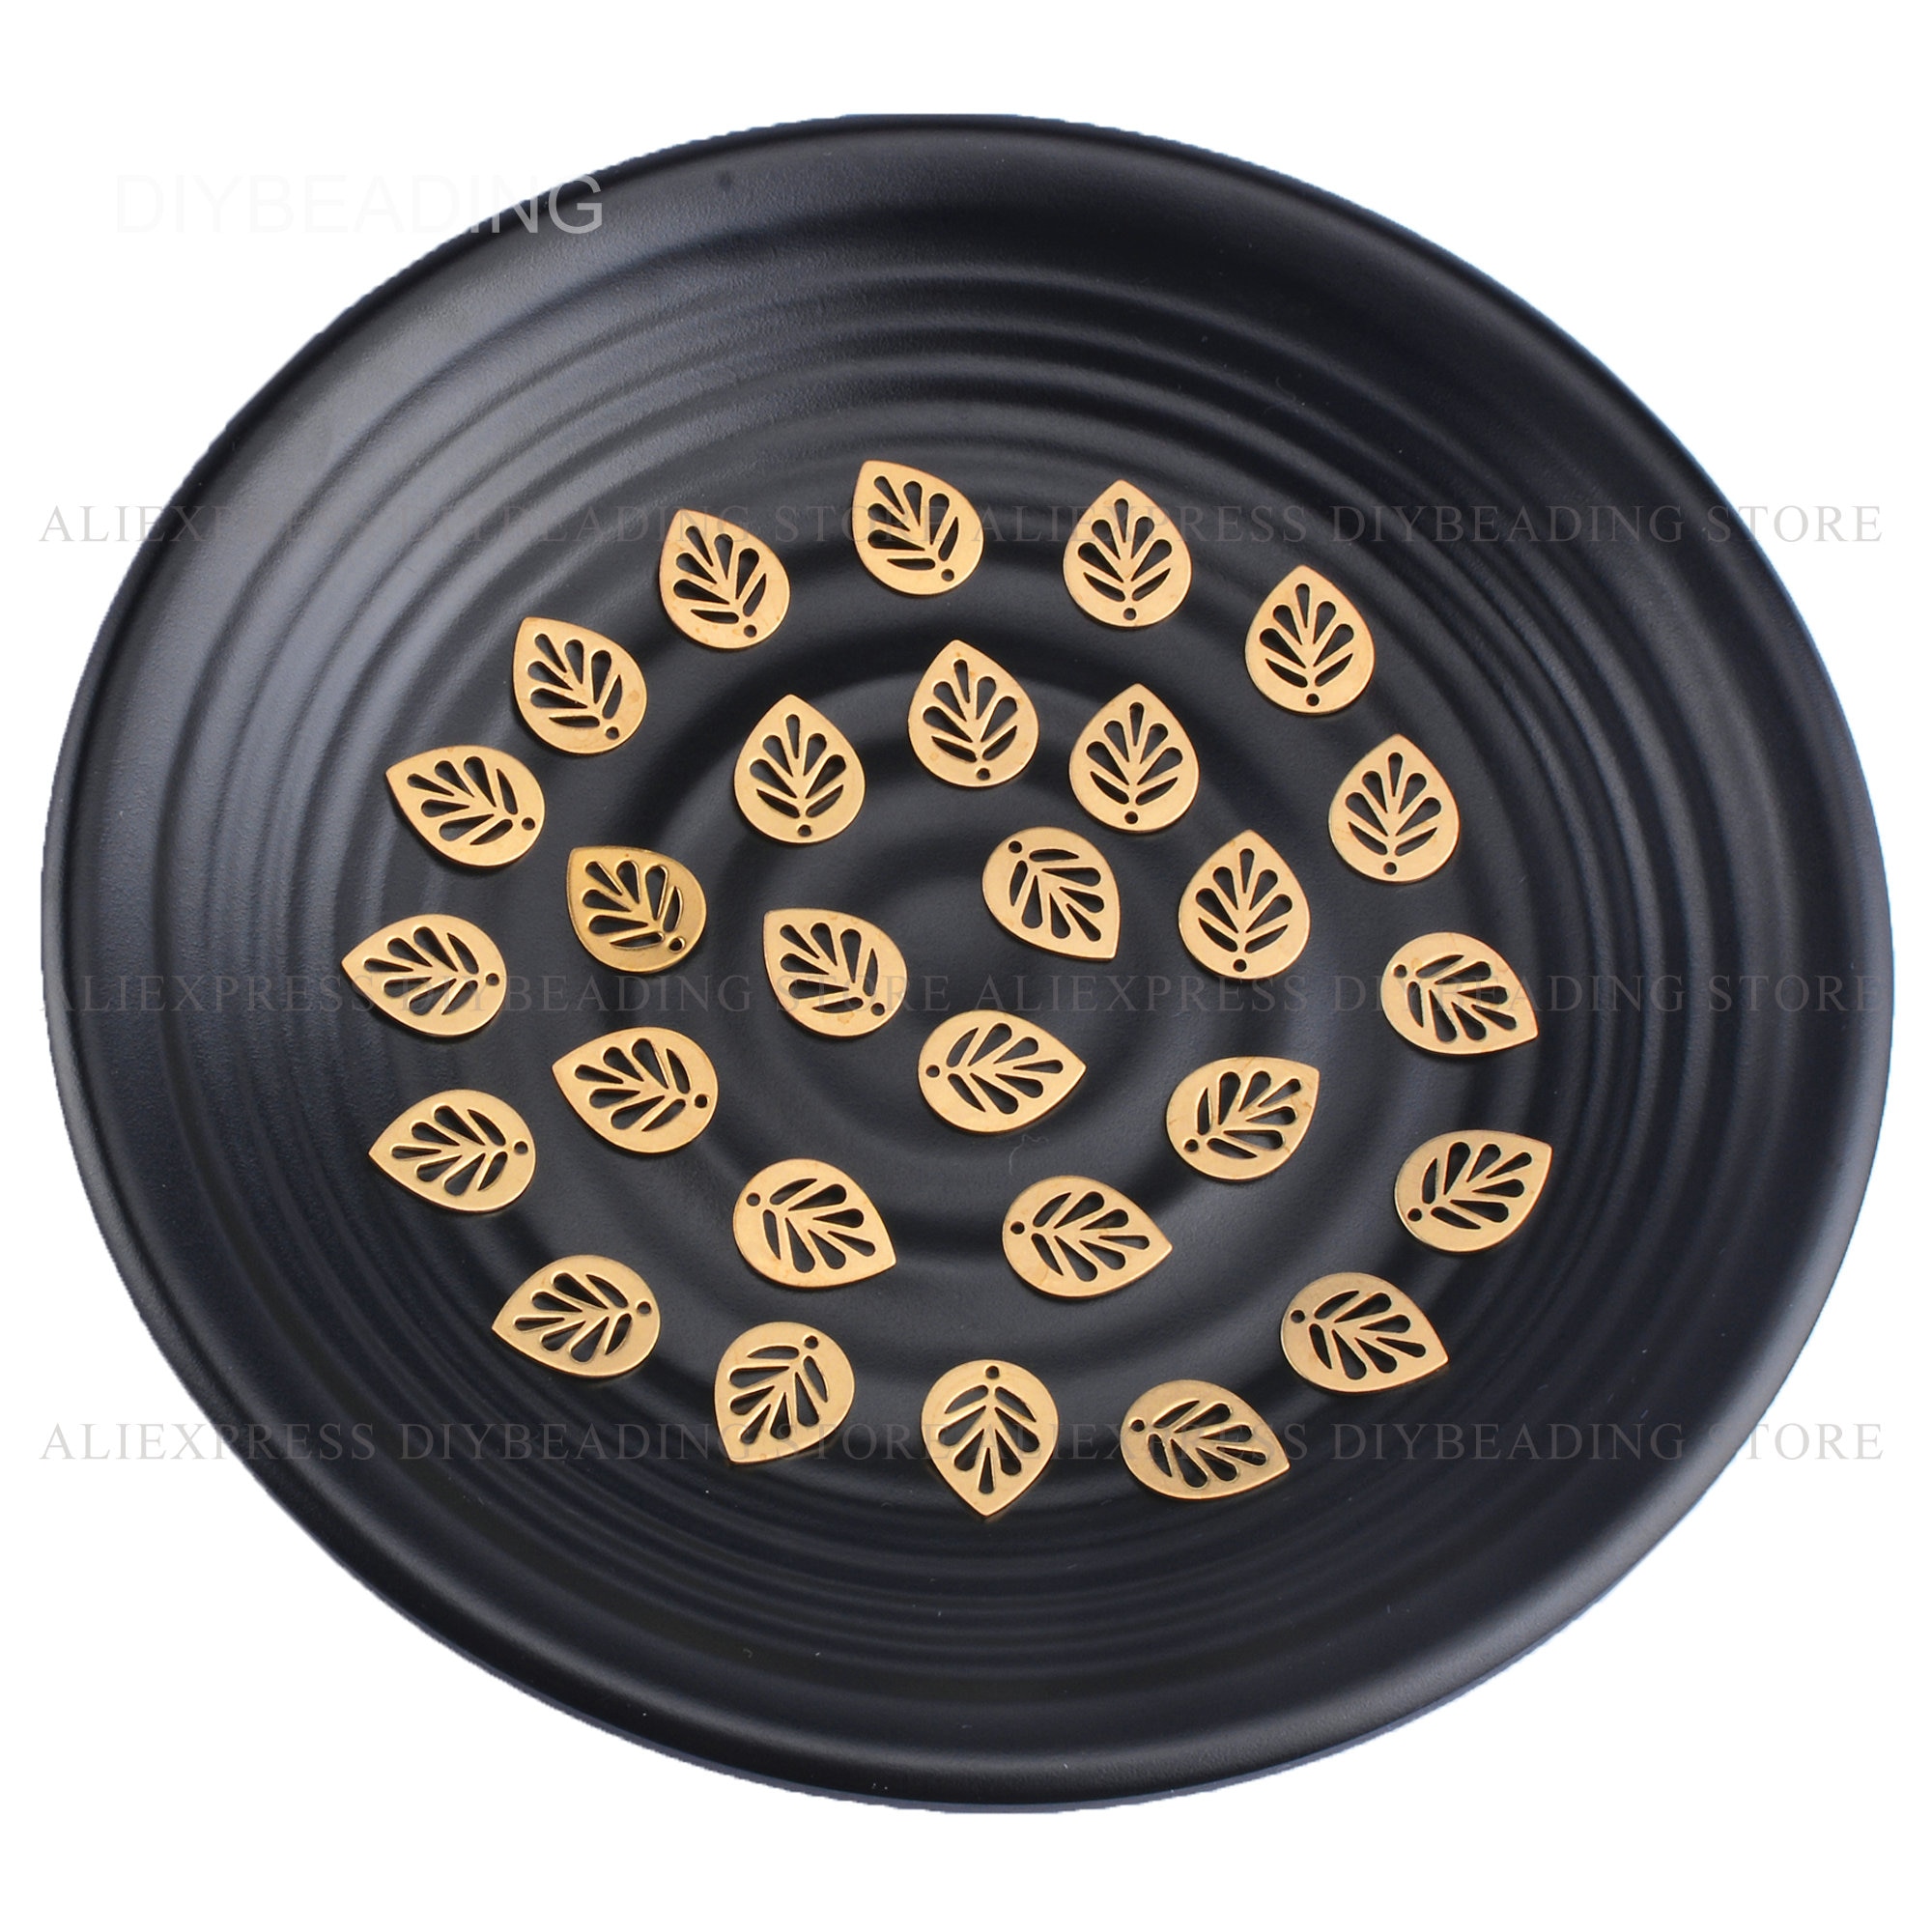 20-1000 Pcs Brass Leaf Charms Connector Pendant for ..